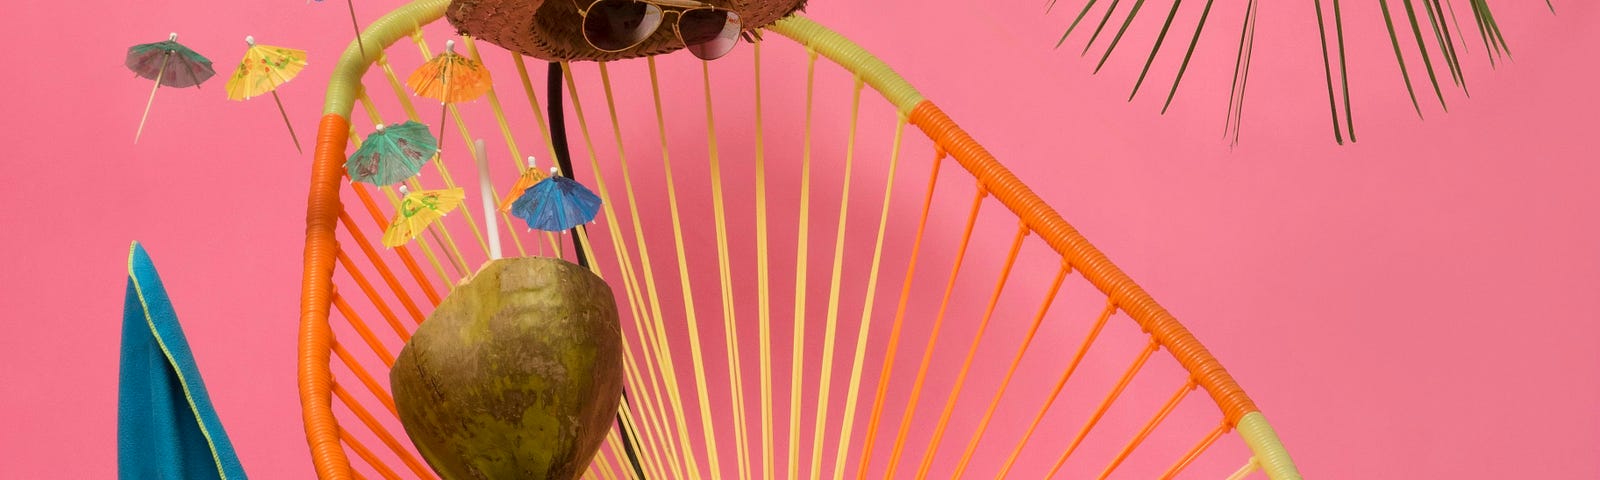 Invisible man sitting in a mesh chair on pink background.